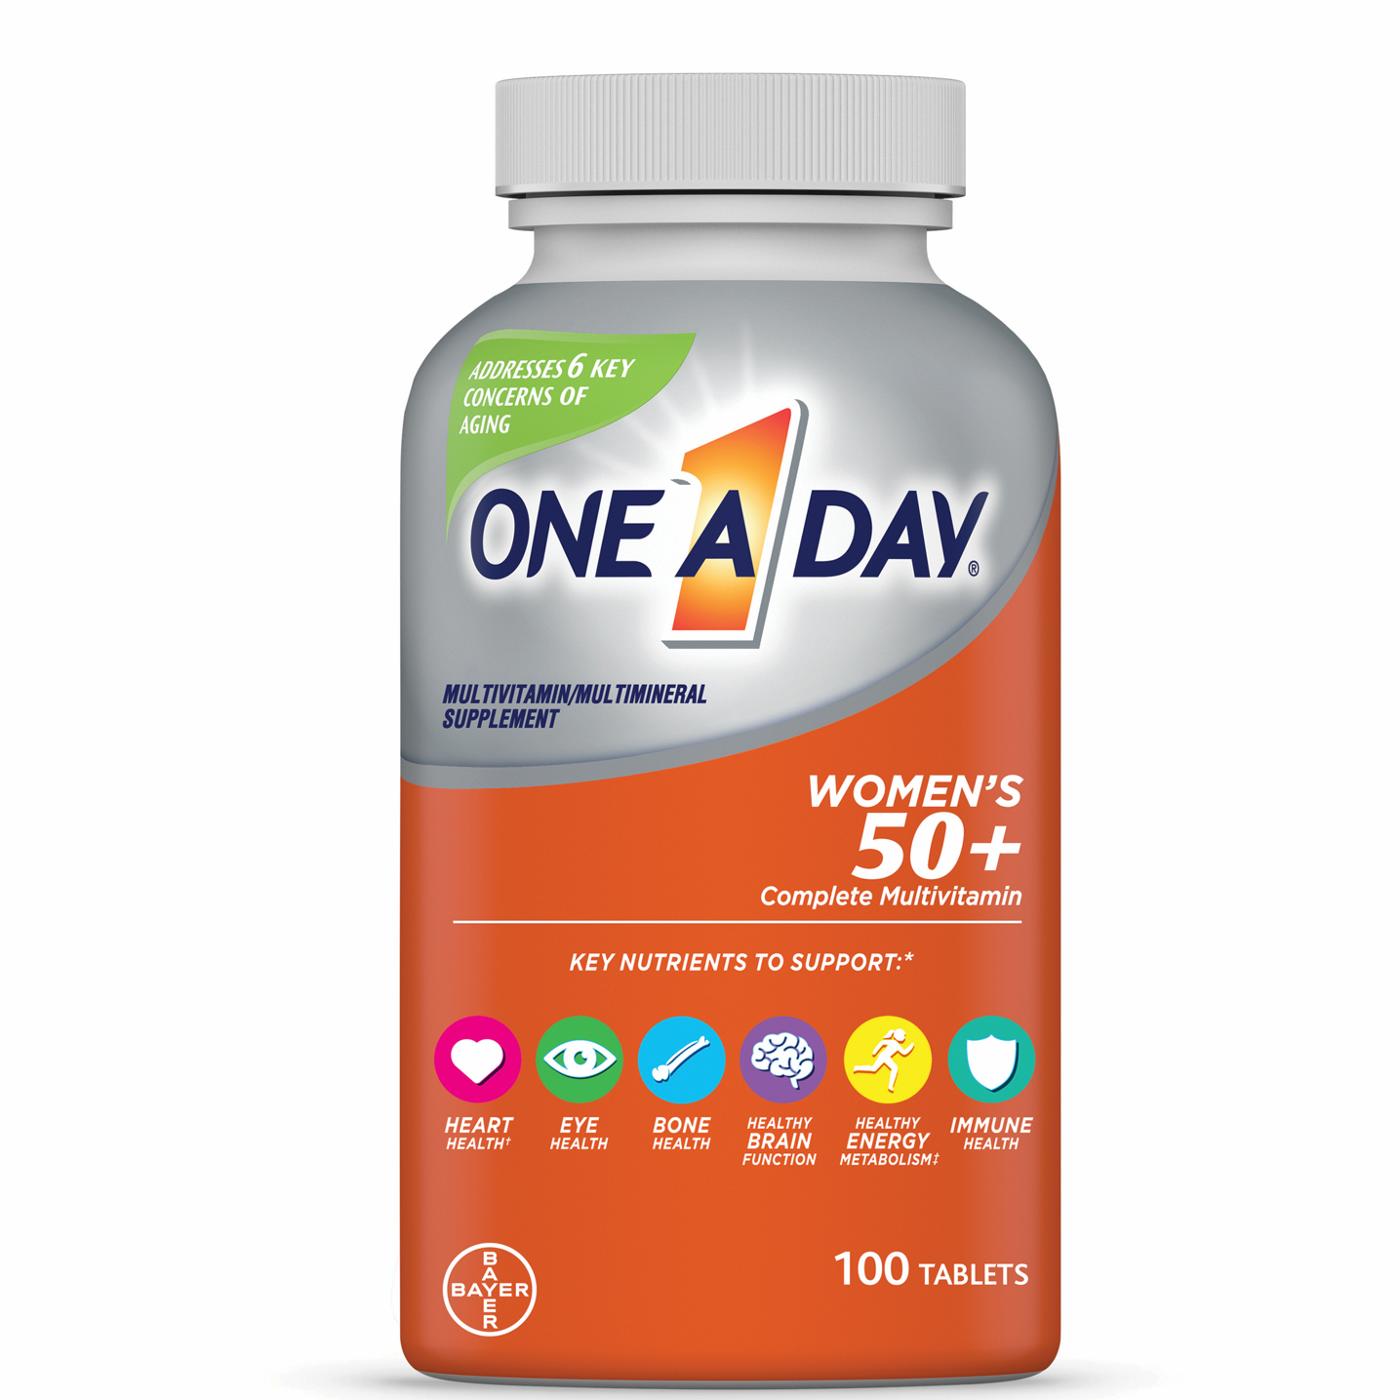 One A Day Women's Multivitamin/Multimineral Supplement 50+ Healthy Advantage Tablets; image 1 of 5